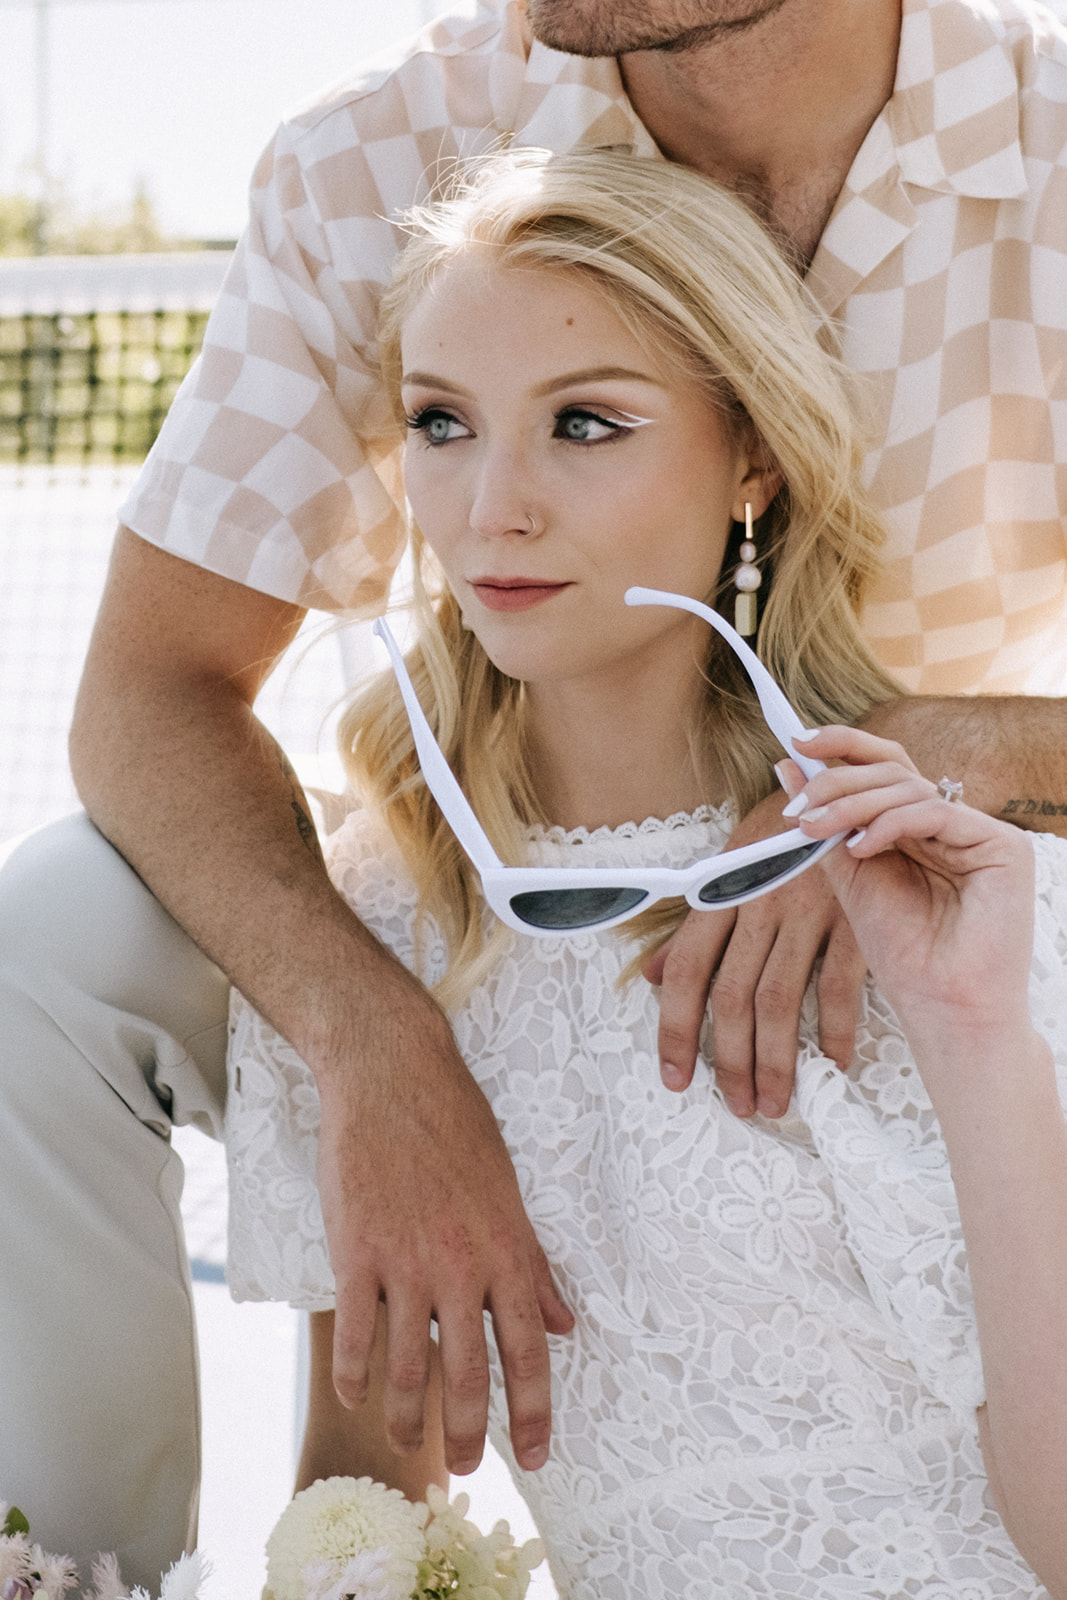 Bridal portrait on tennis court with bride wearing white cat-eye sunglasses, alternative white eyeliner bridal make-up inspiration, casual groom attire for couples portraits on a tennis court